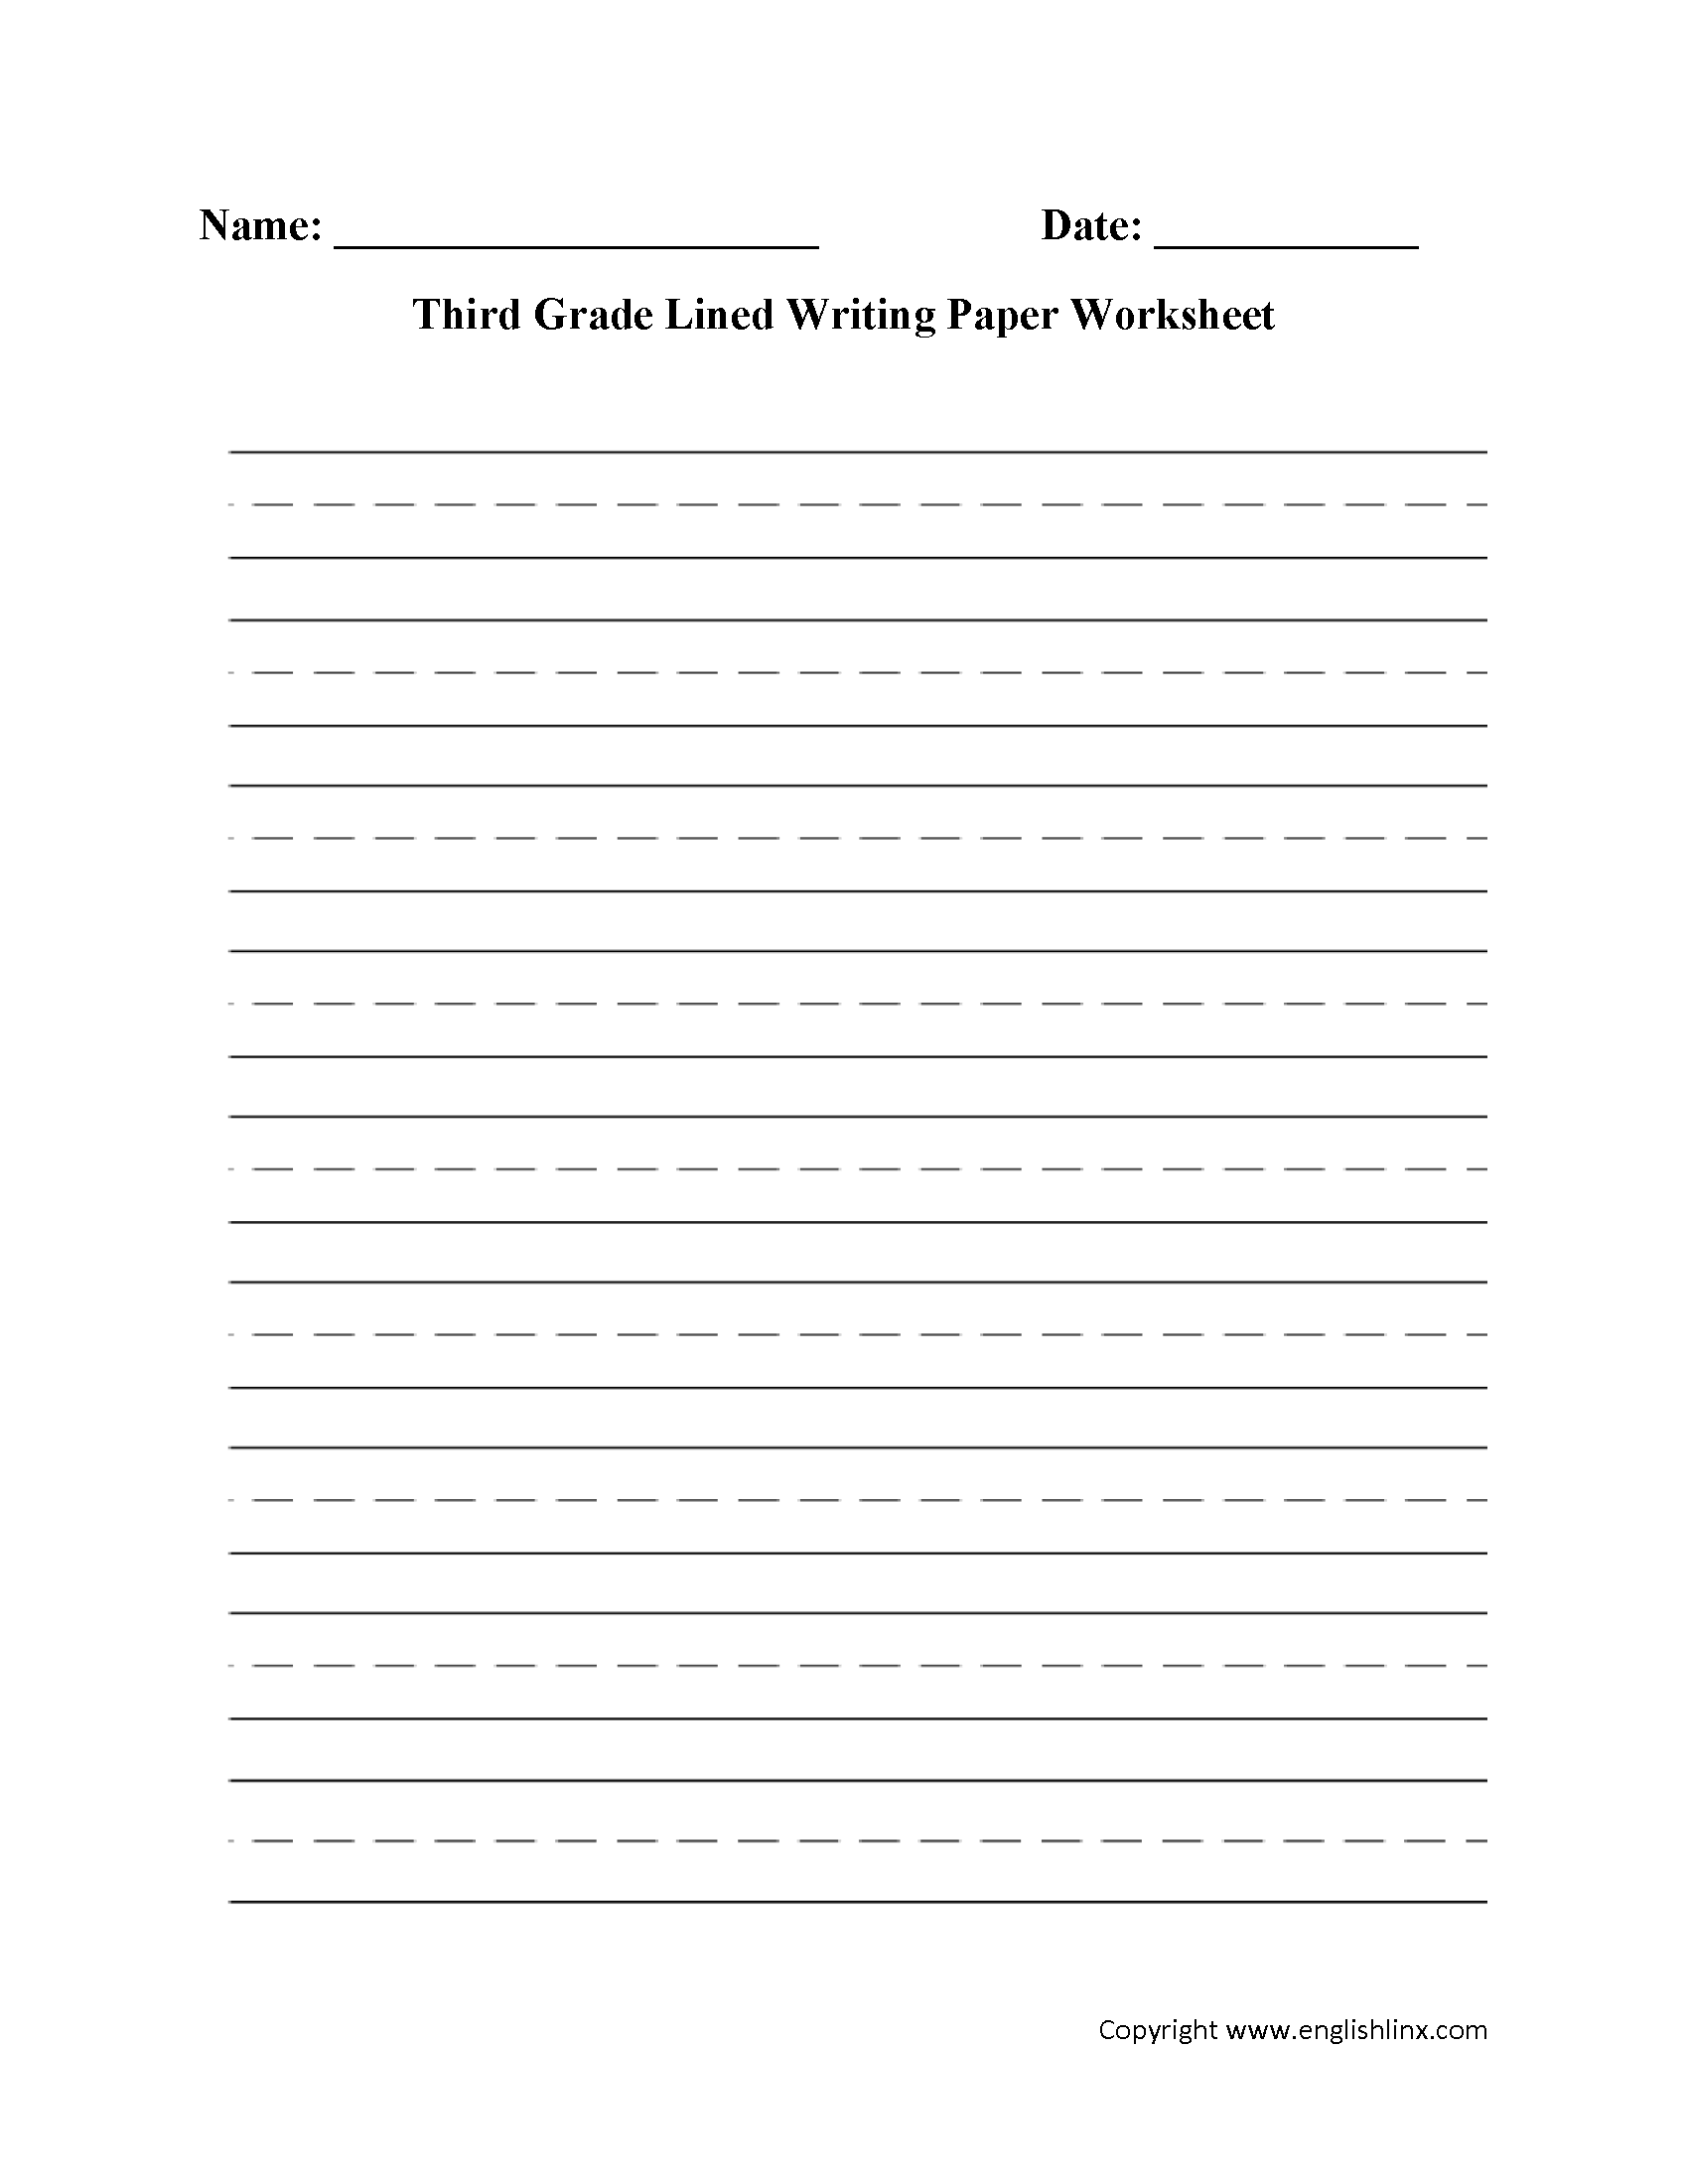 Writing Worksheets | Lined Writing Paper Worksheets